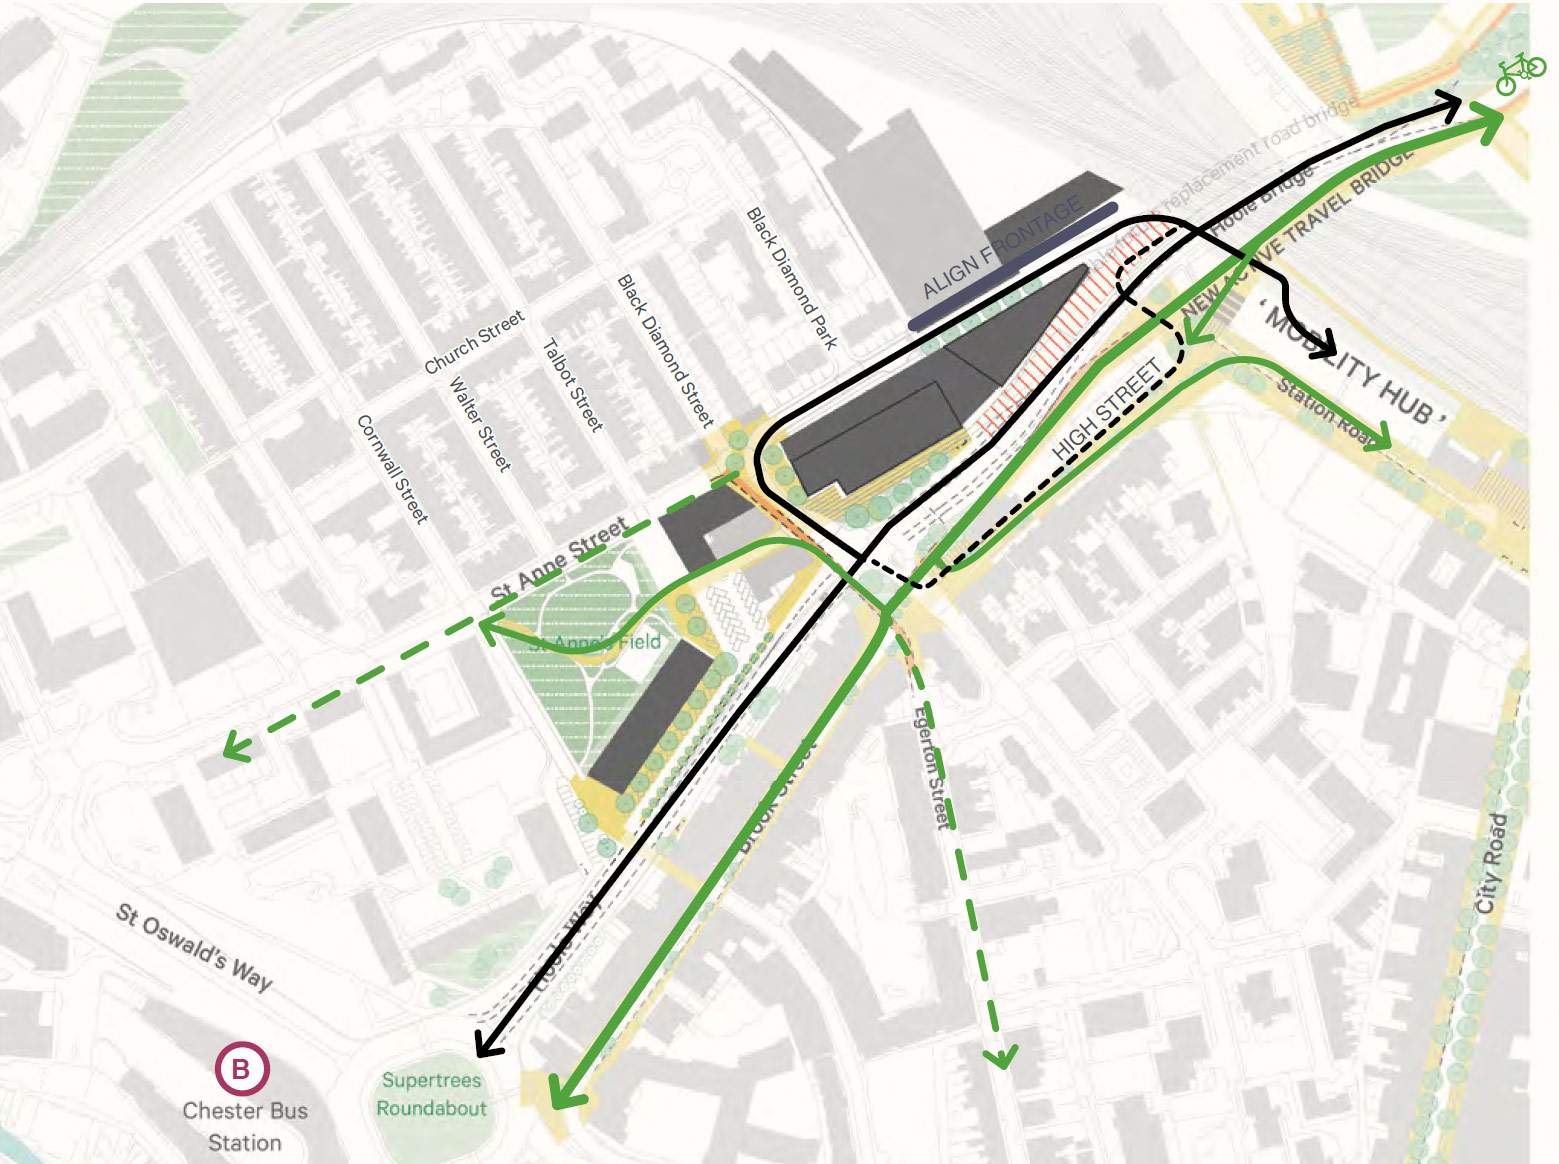 Indicative plan showing potential development and access routes for consultation